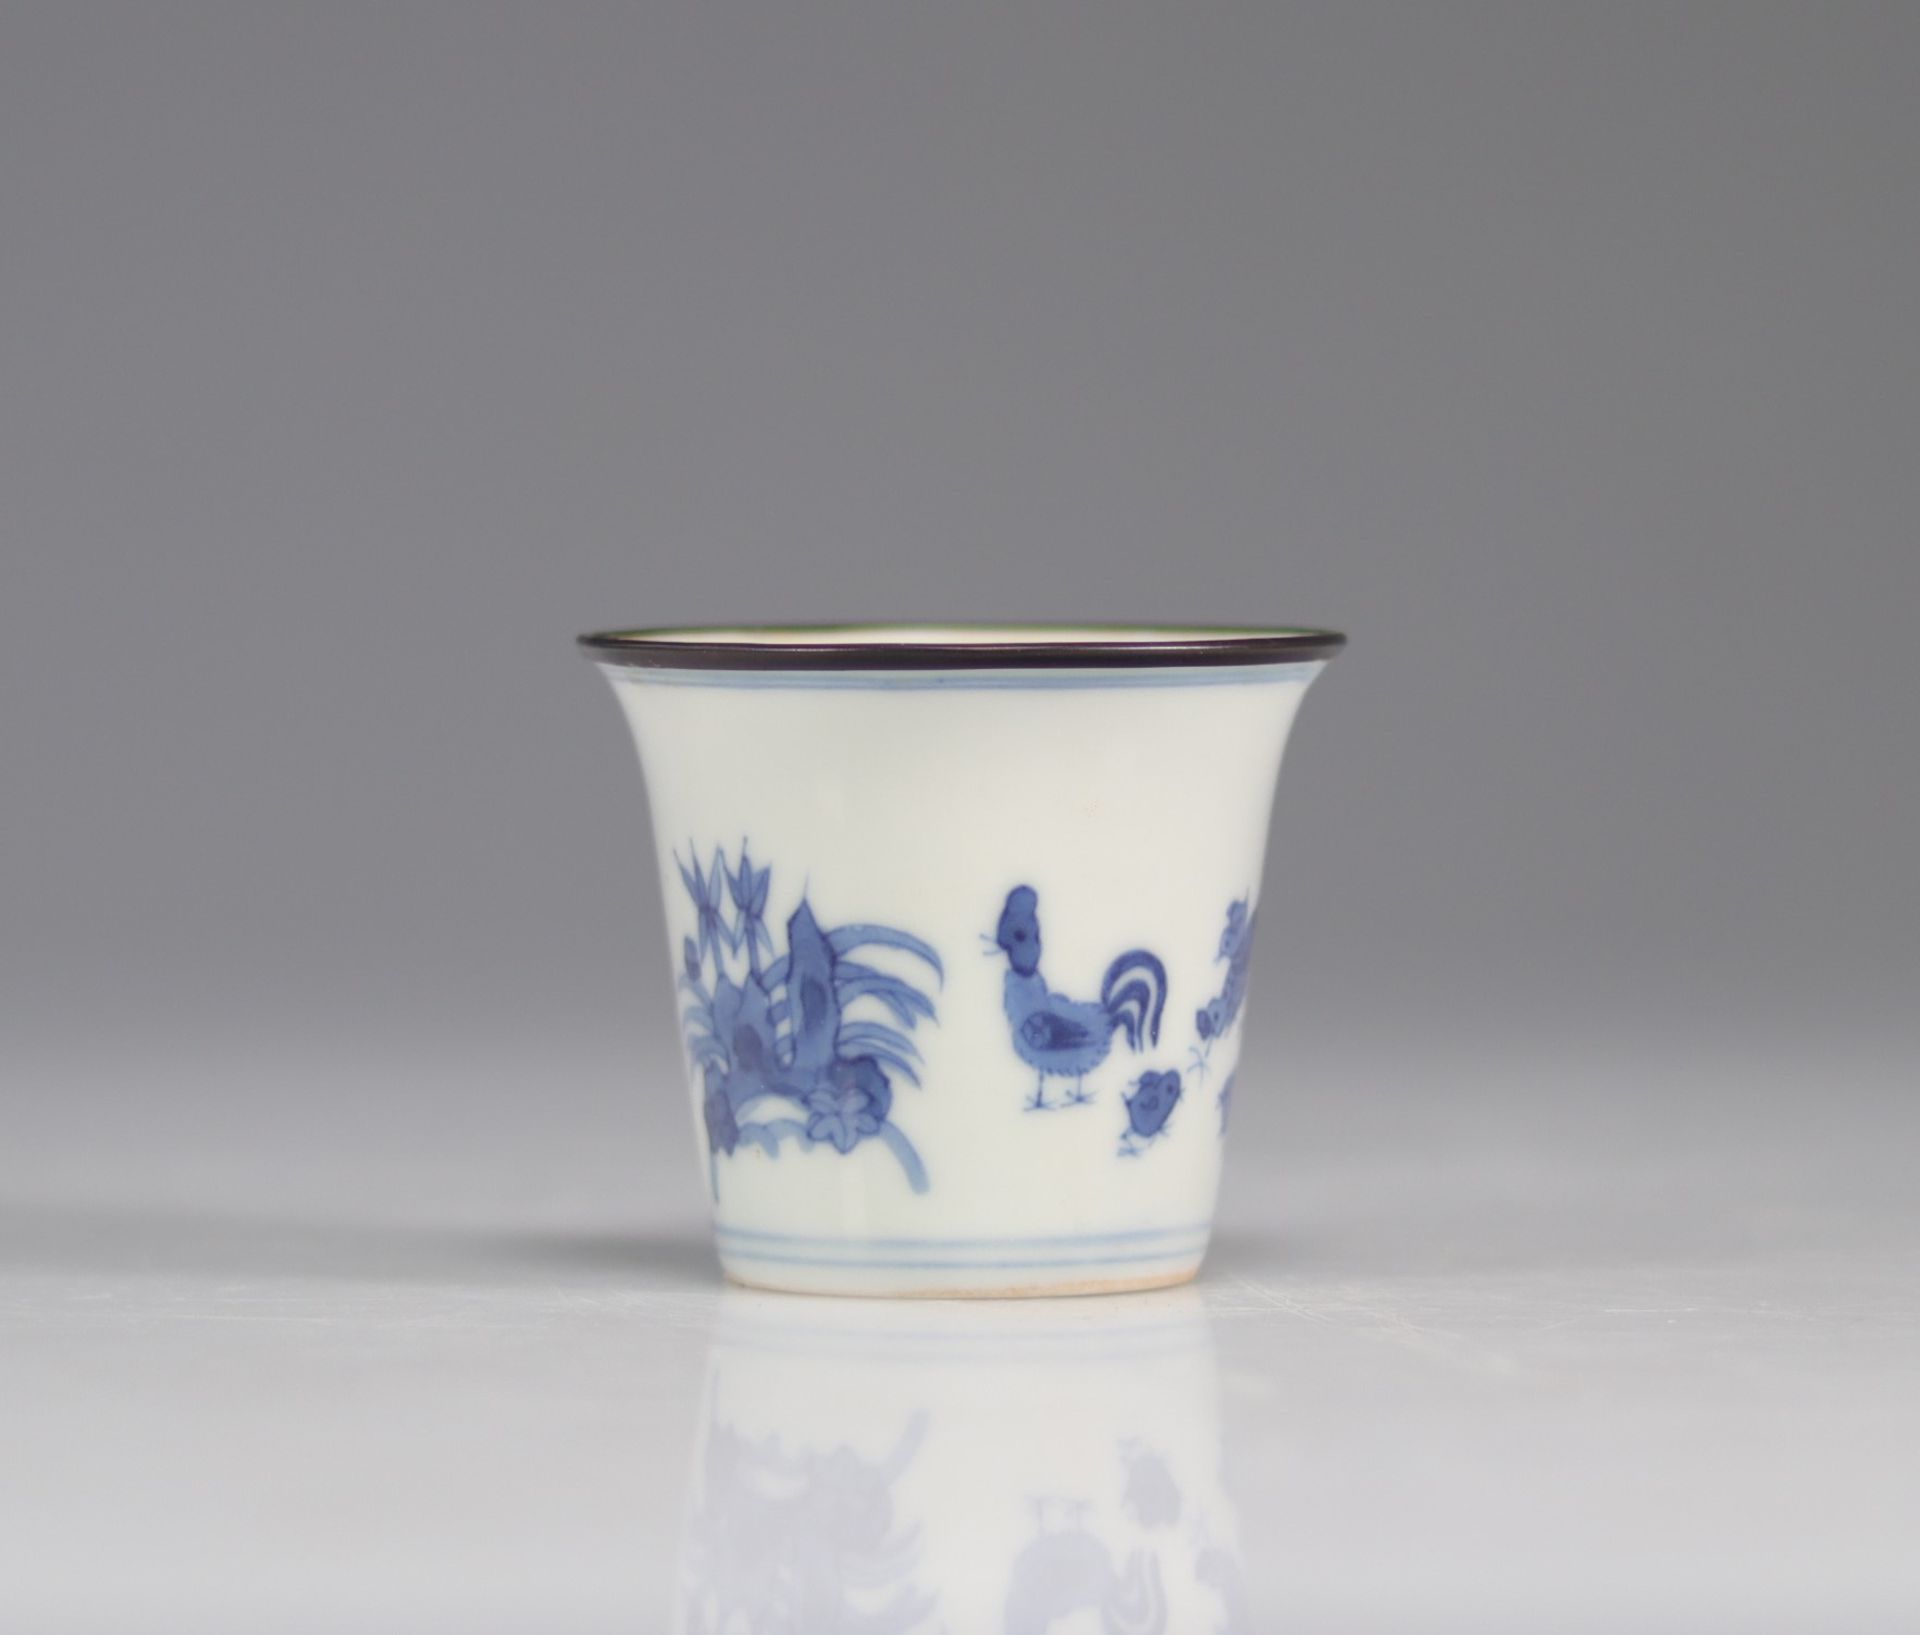 Rare blue white porcelain bowl 'Chicken cup' apocryphal mark Chenghua Qing dynasty - Image 2 of 5